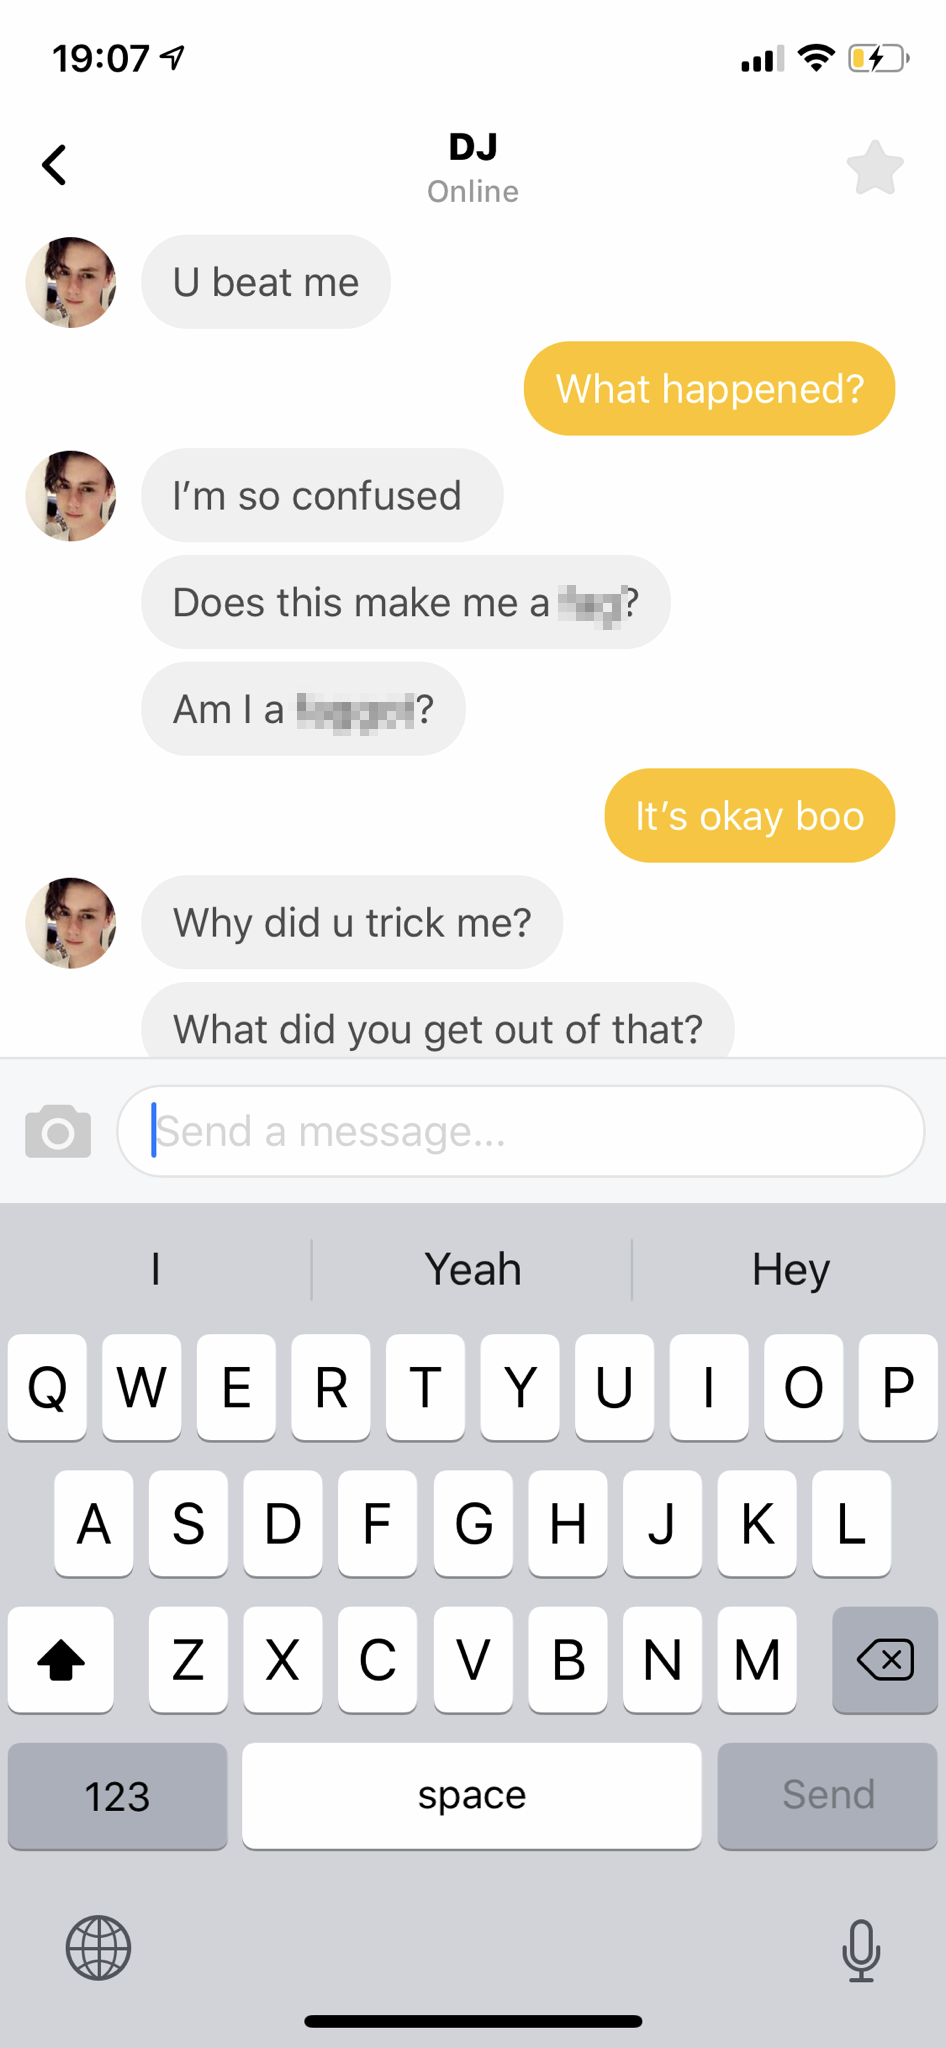 Super Desperate Dude Sends Unsolicited Dick Pic and Then Gets Trolled Into Oblivion